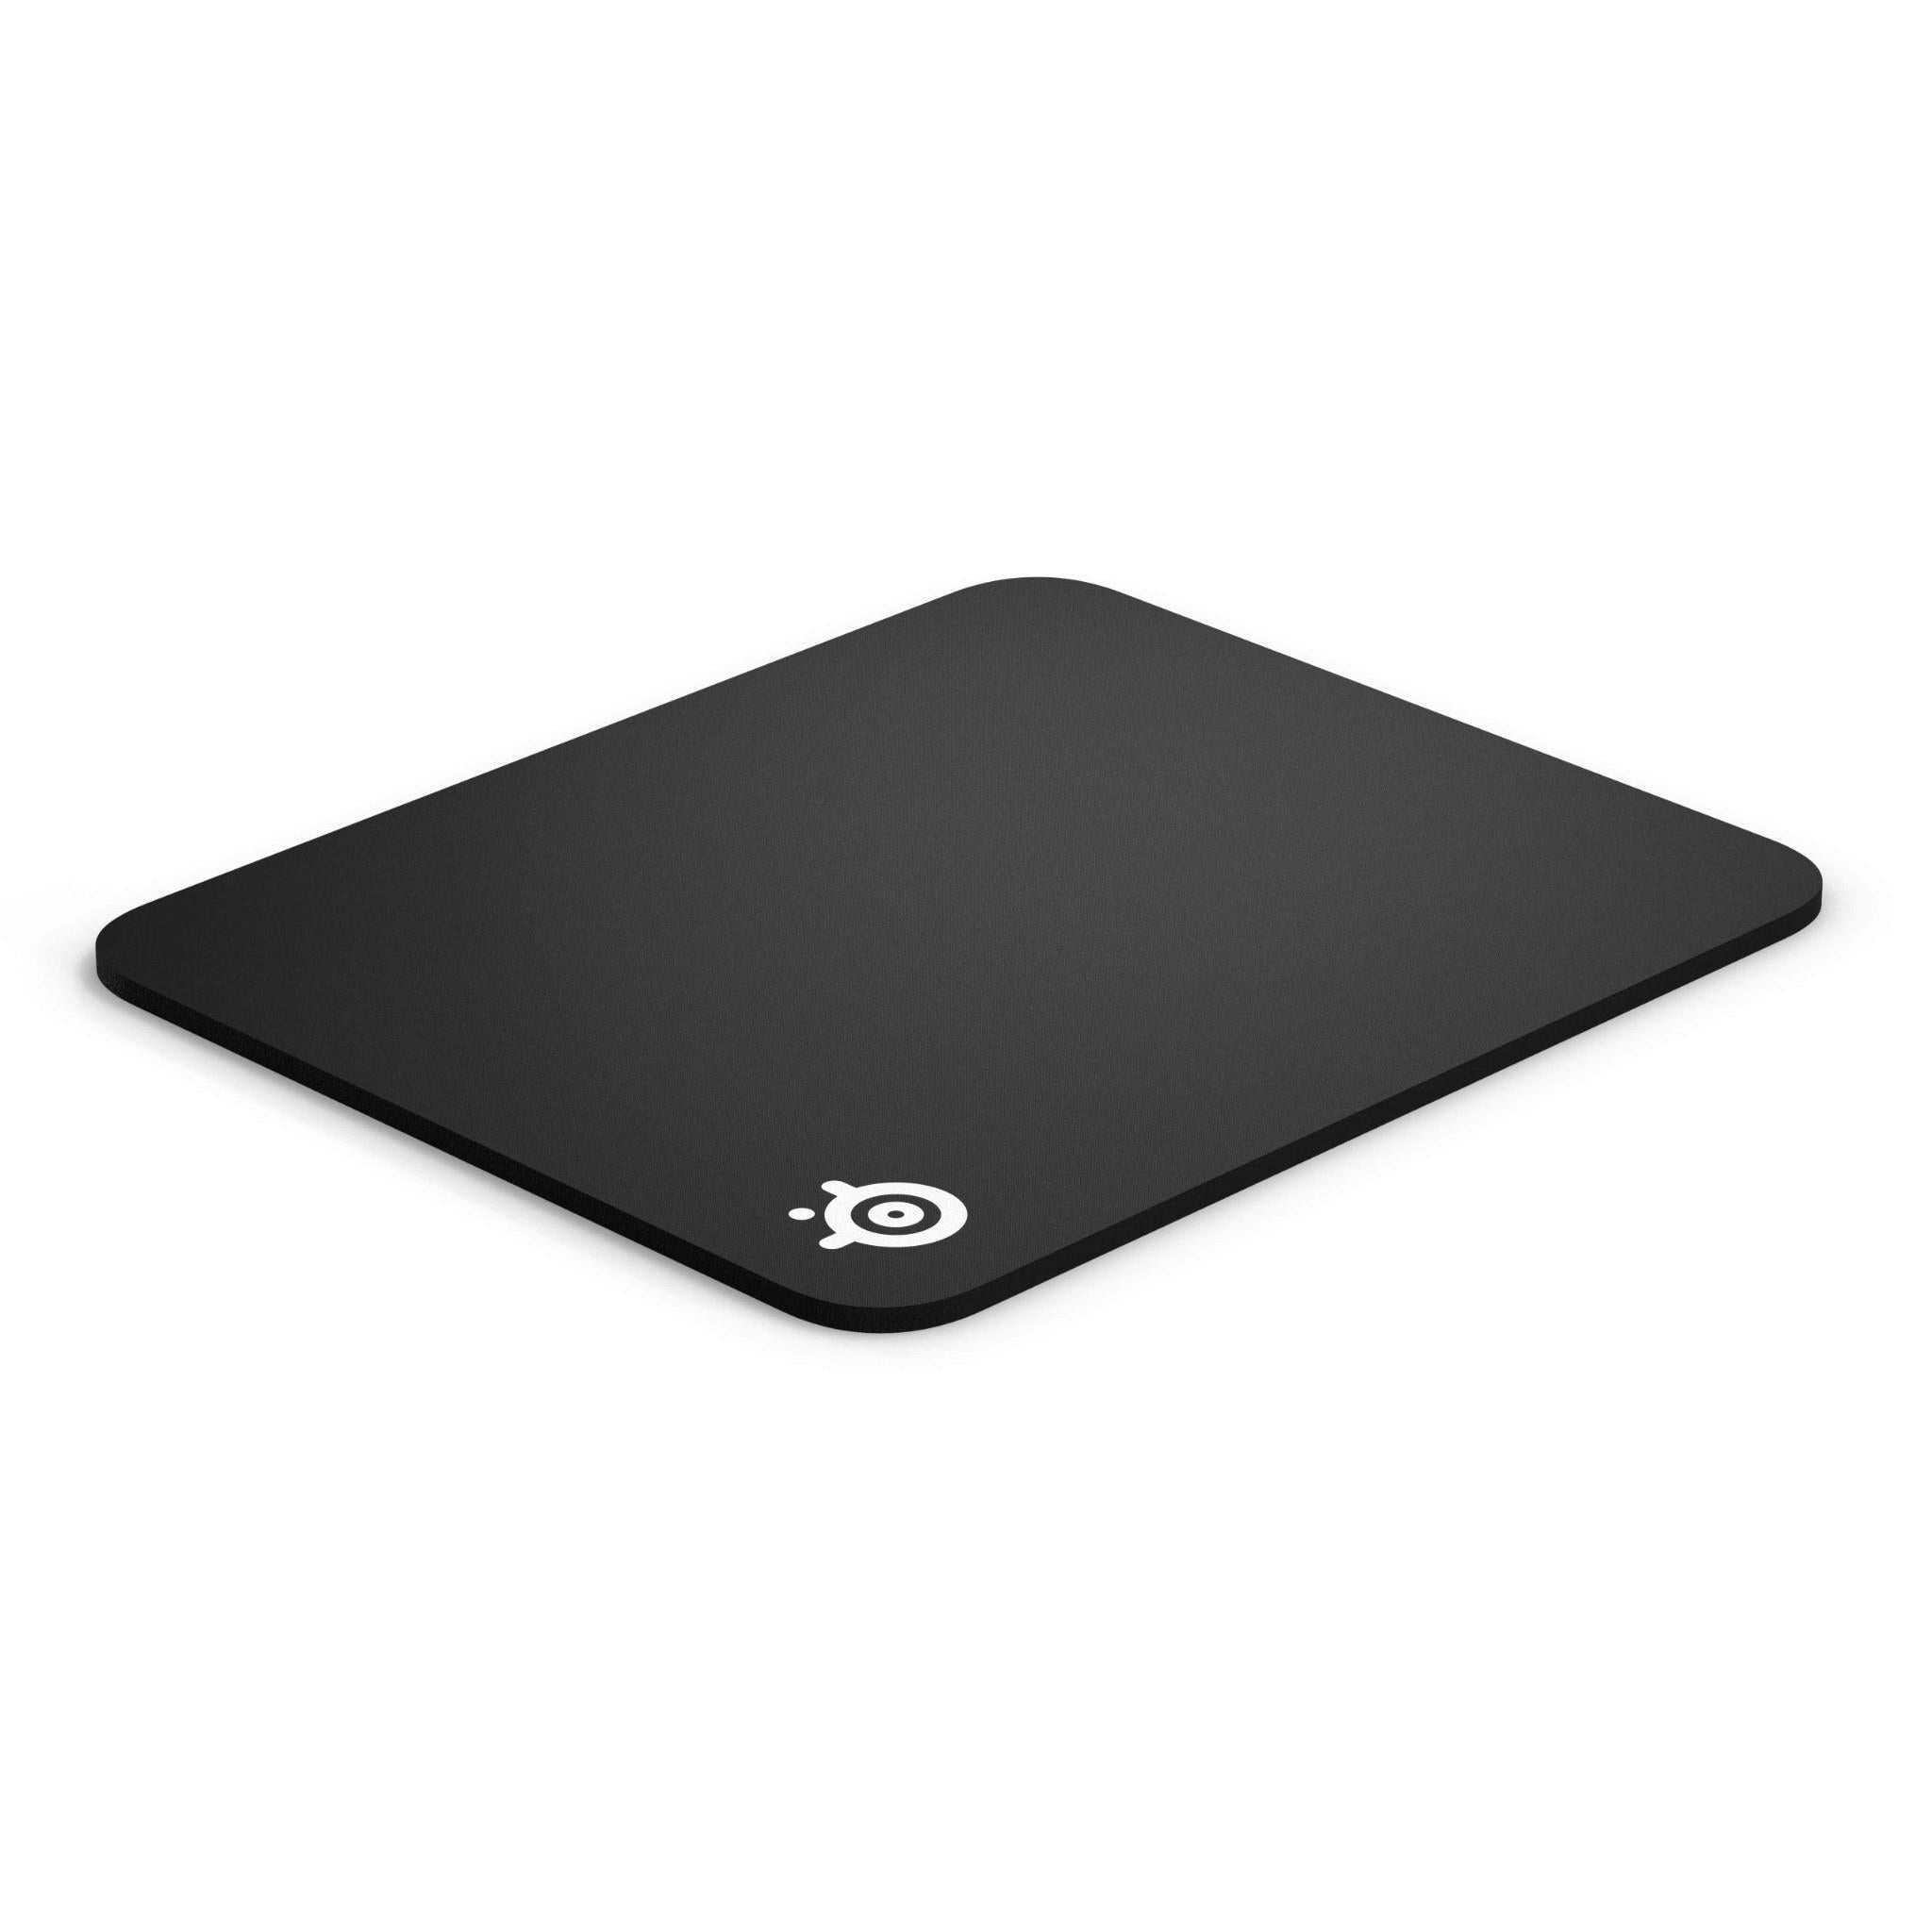 steelseries qck heavy medium 6mm thick gaming mouse pad